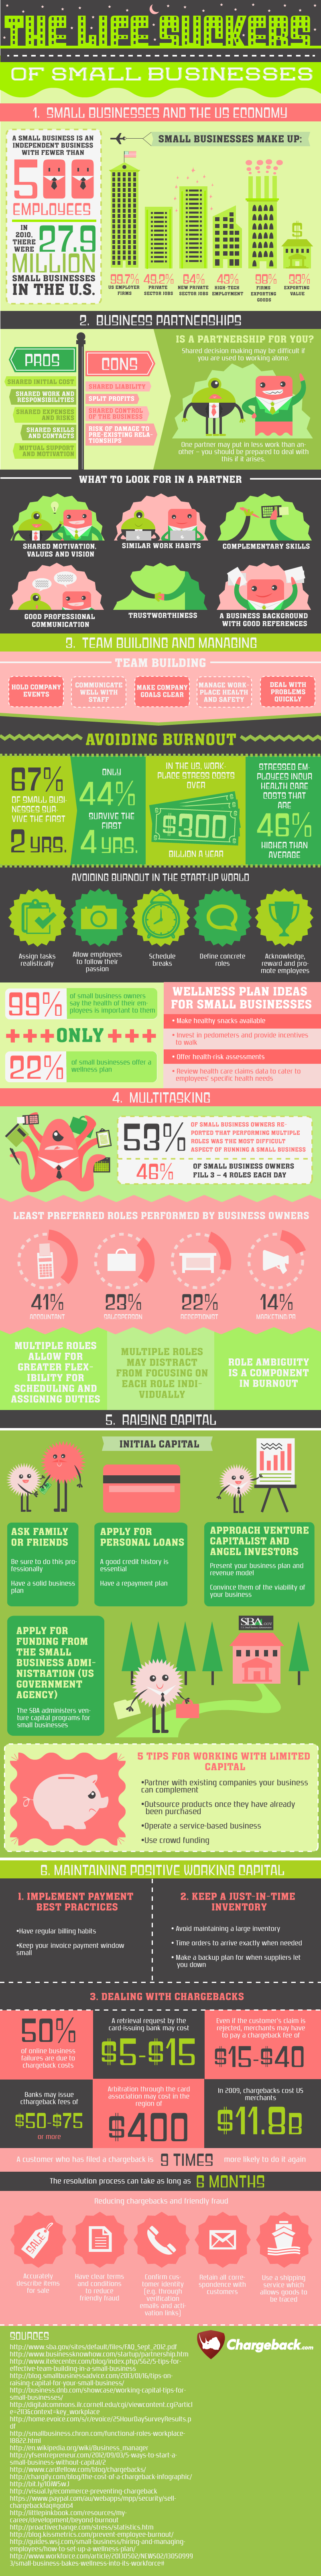 39 Remarkable Small Business Facts and Figures